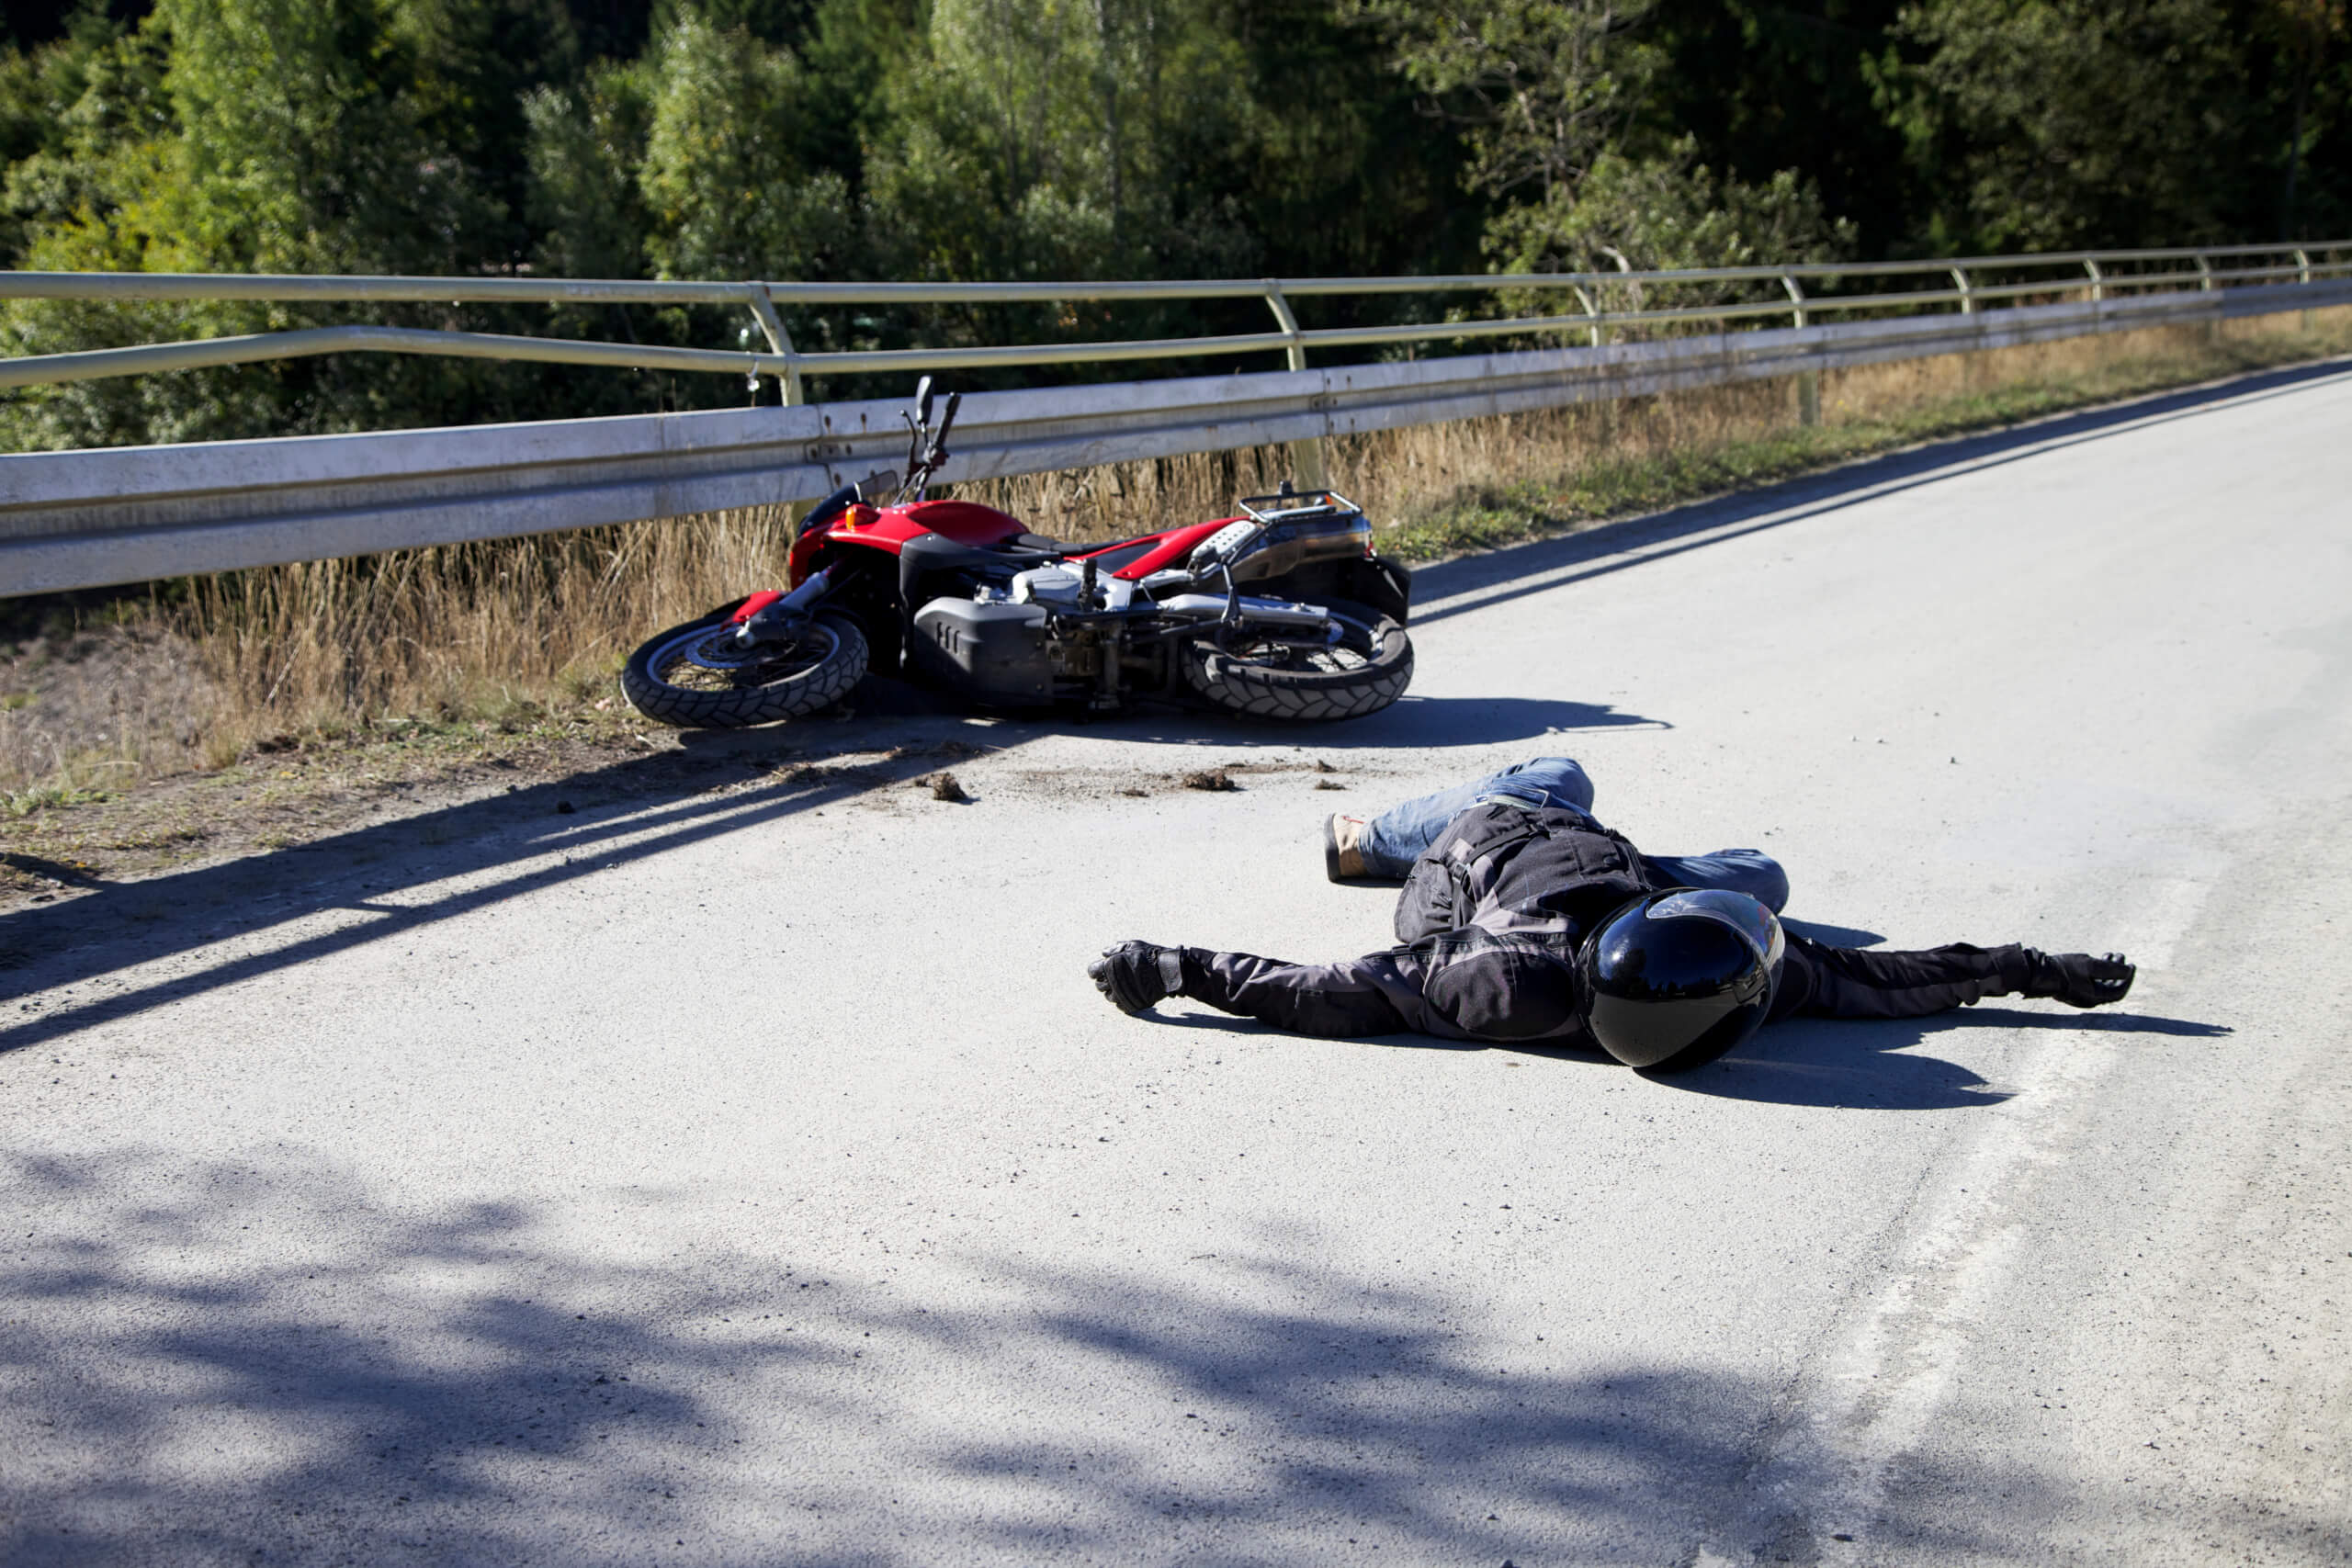 Who can access accidental death benefits after motorcyclist crash near